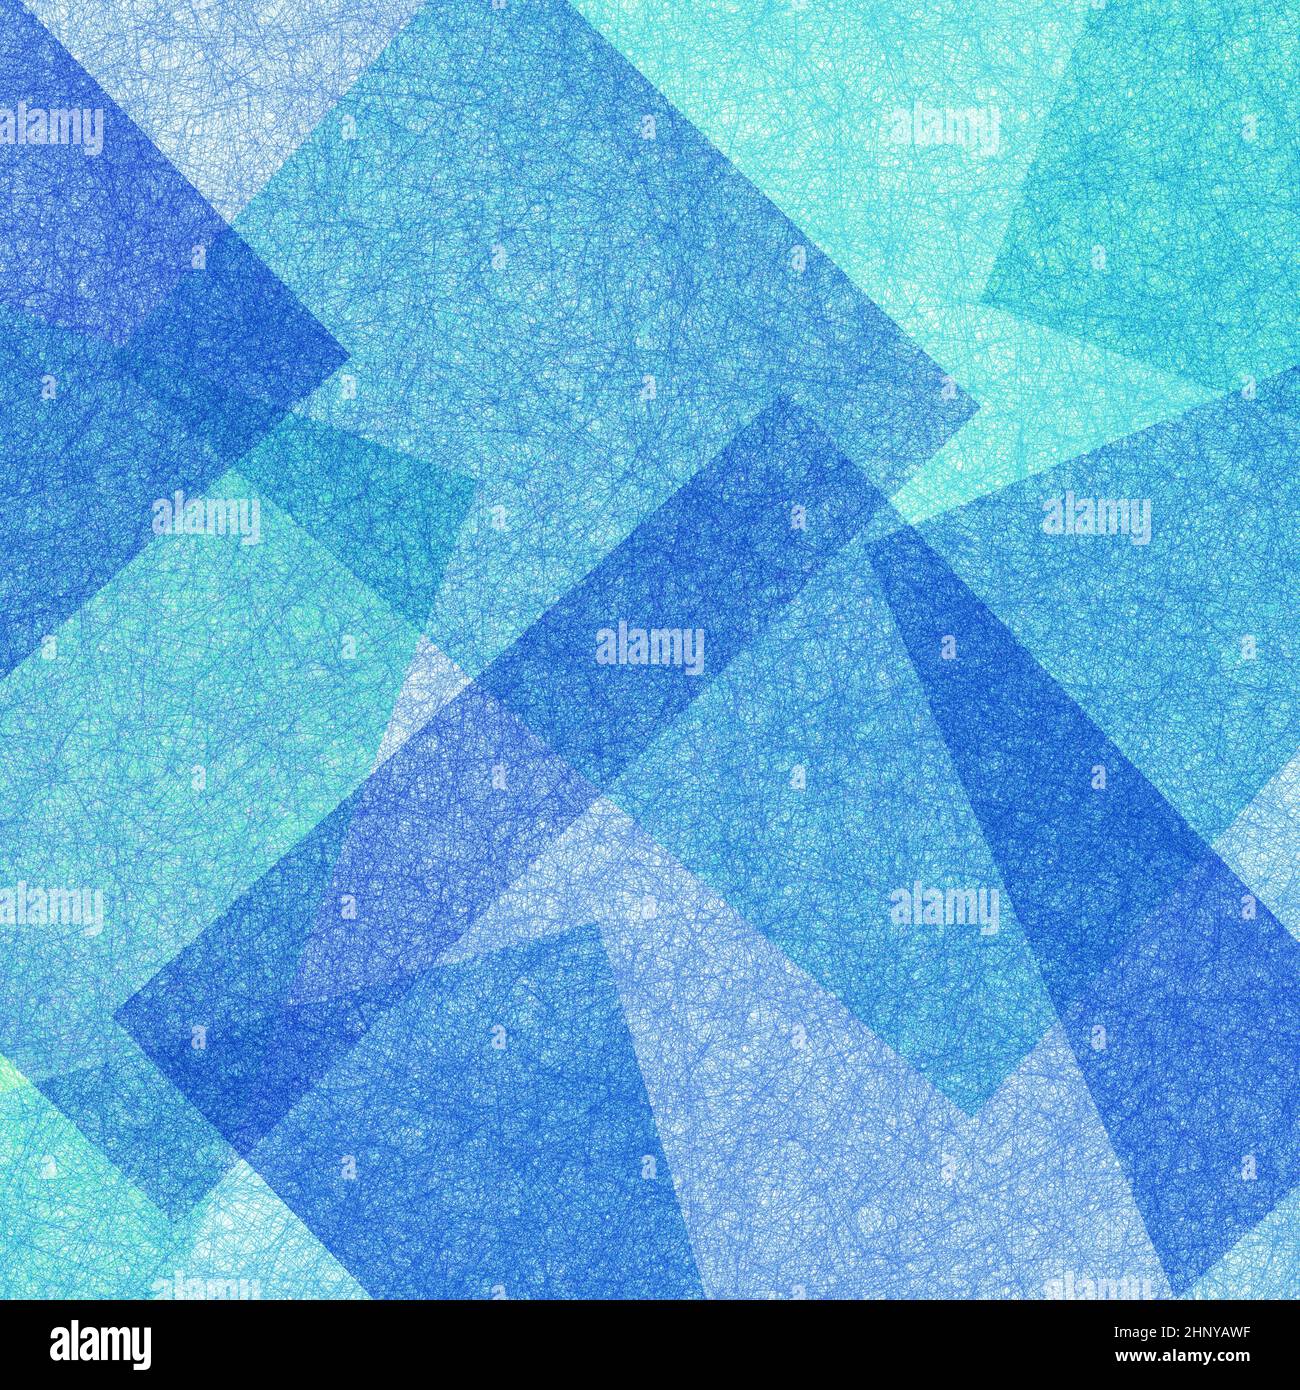 Abstract geometric background in blue and green with texture, layers of triangle shapes in modern art style background design Stock Photo